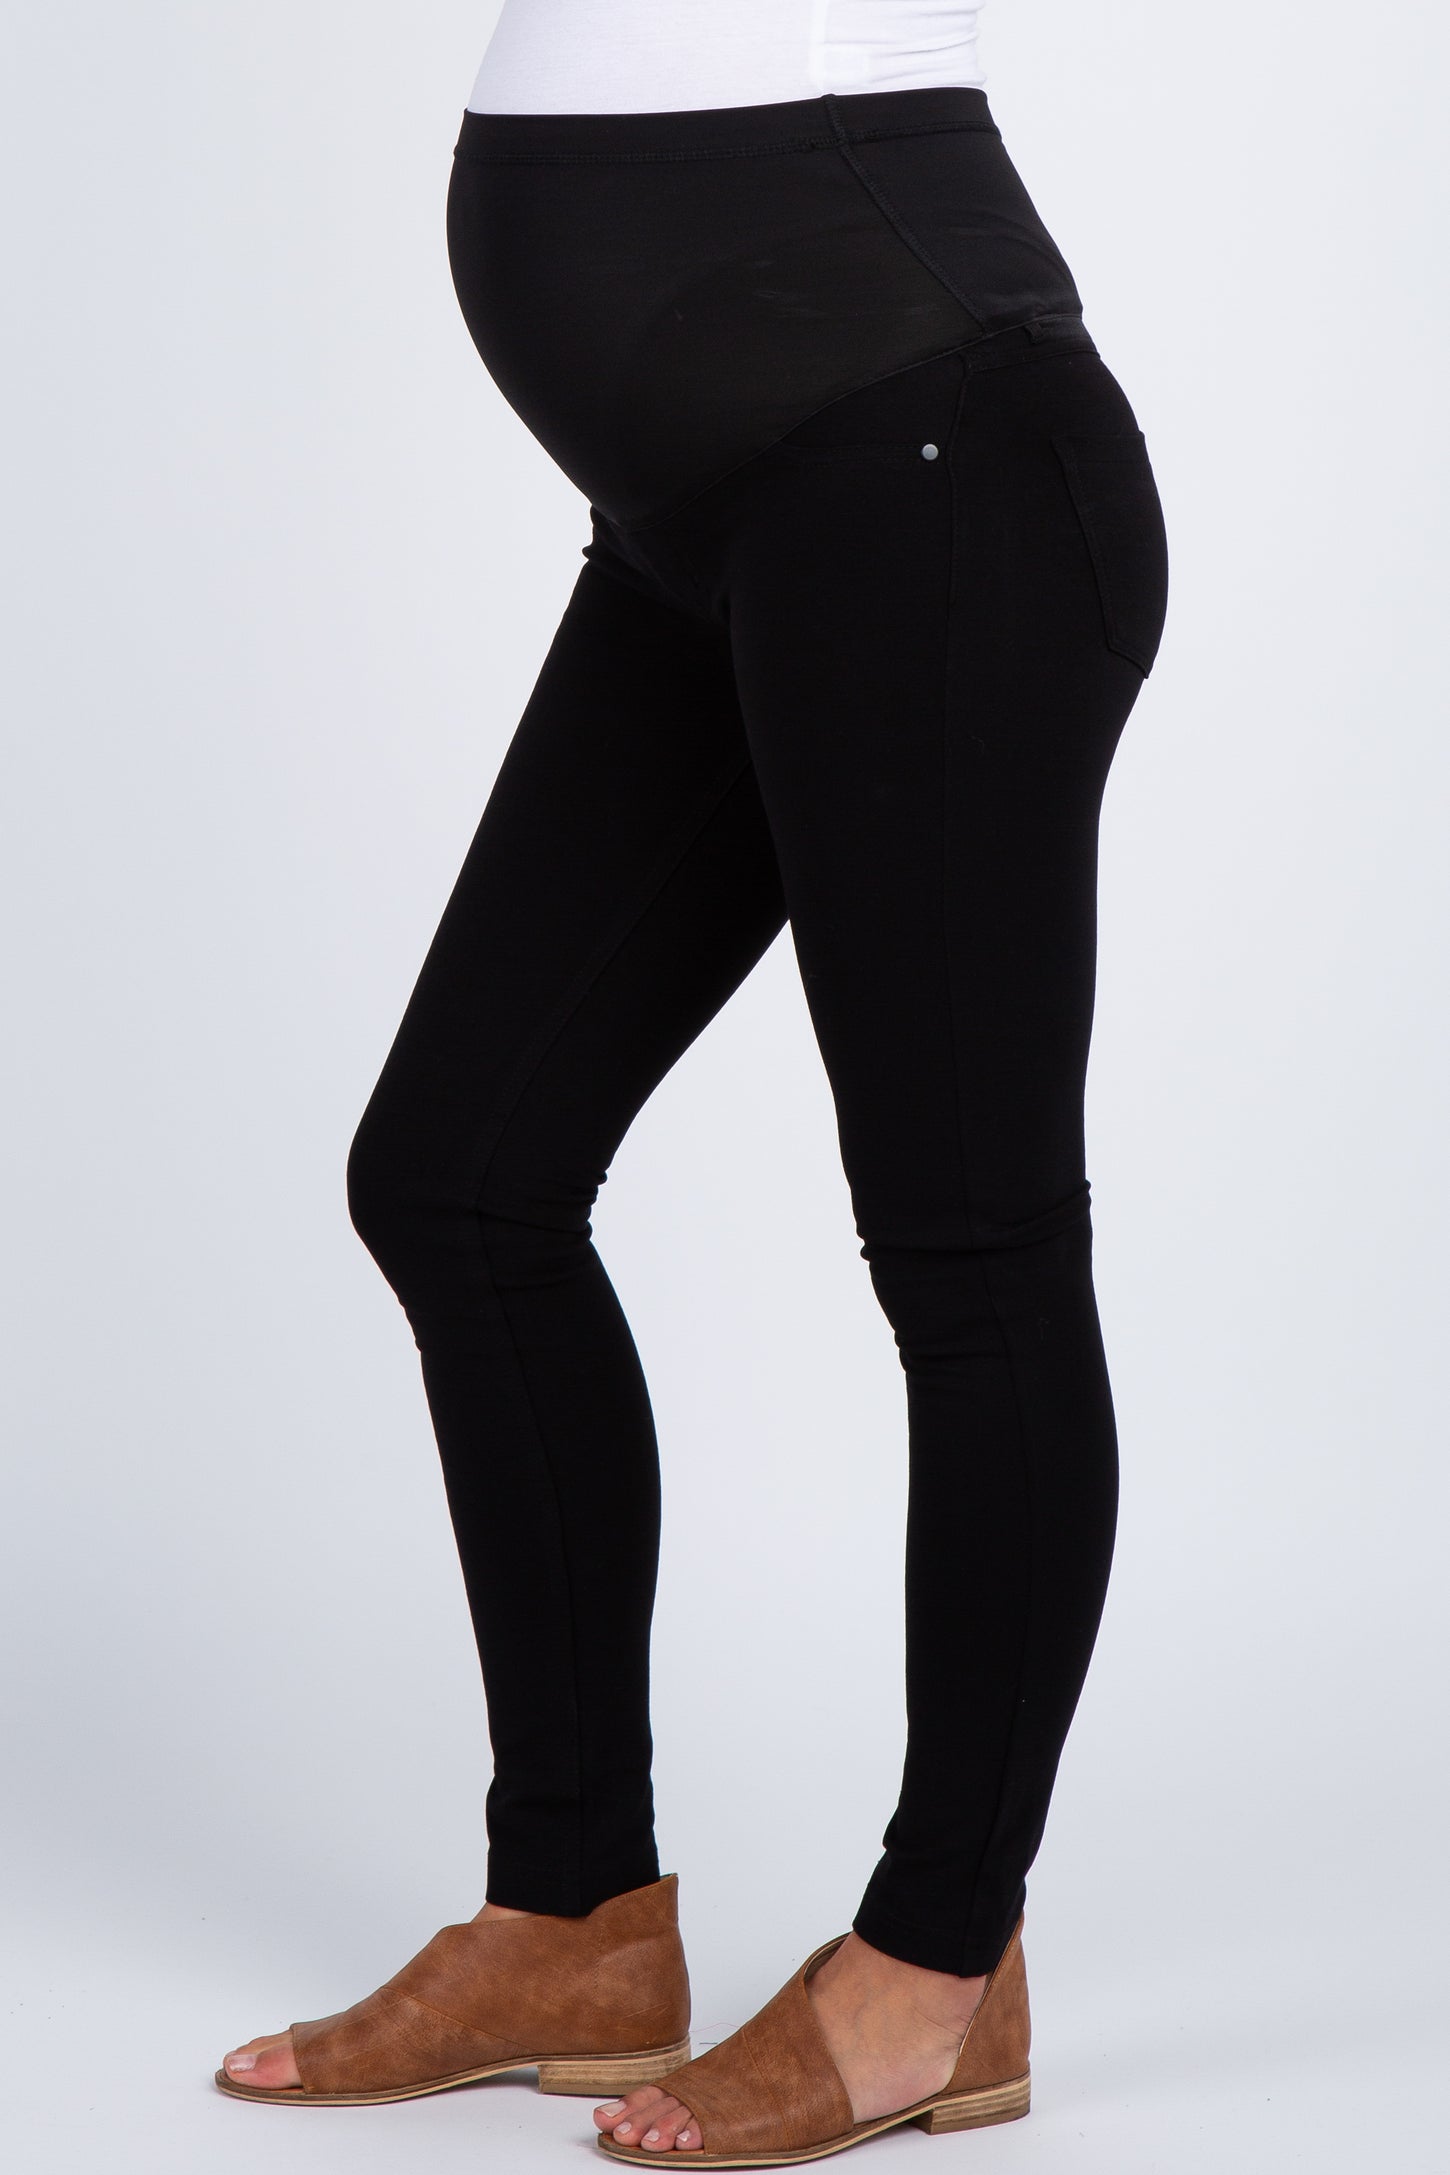 Buy THE CHILDREN'S PLACE Black Girls Solid Jeggings